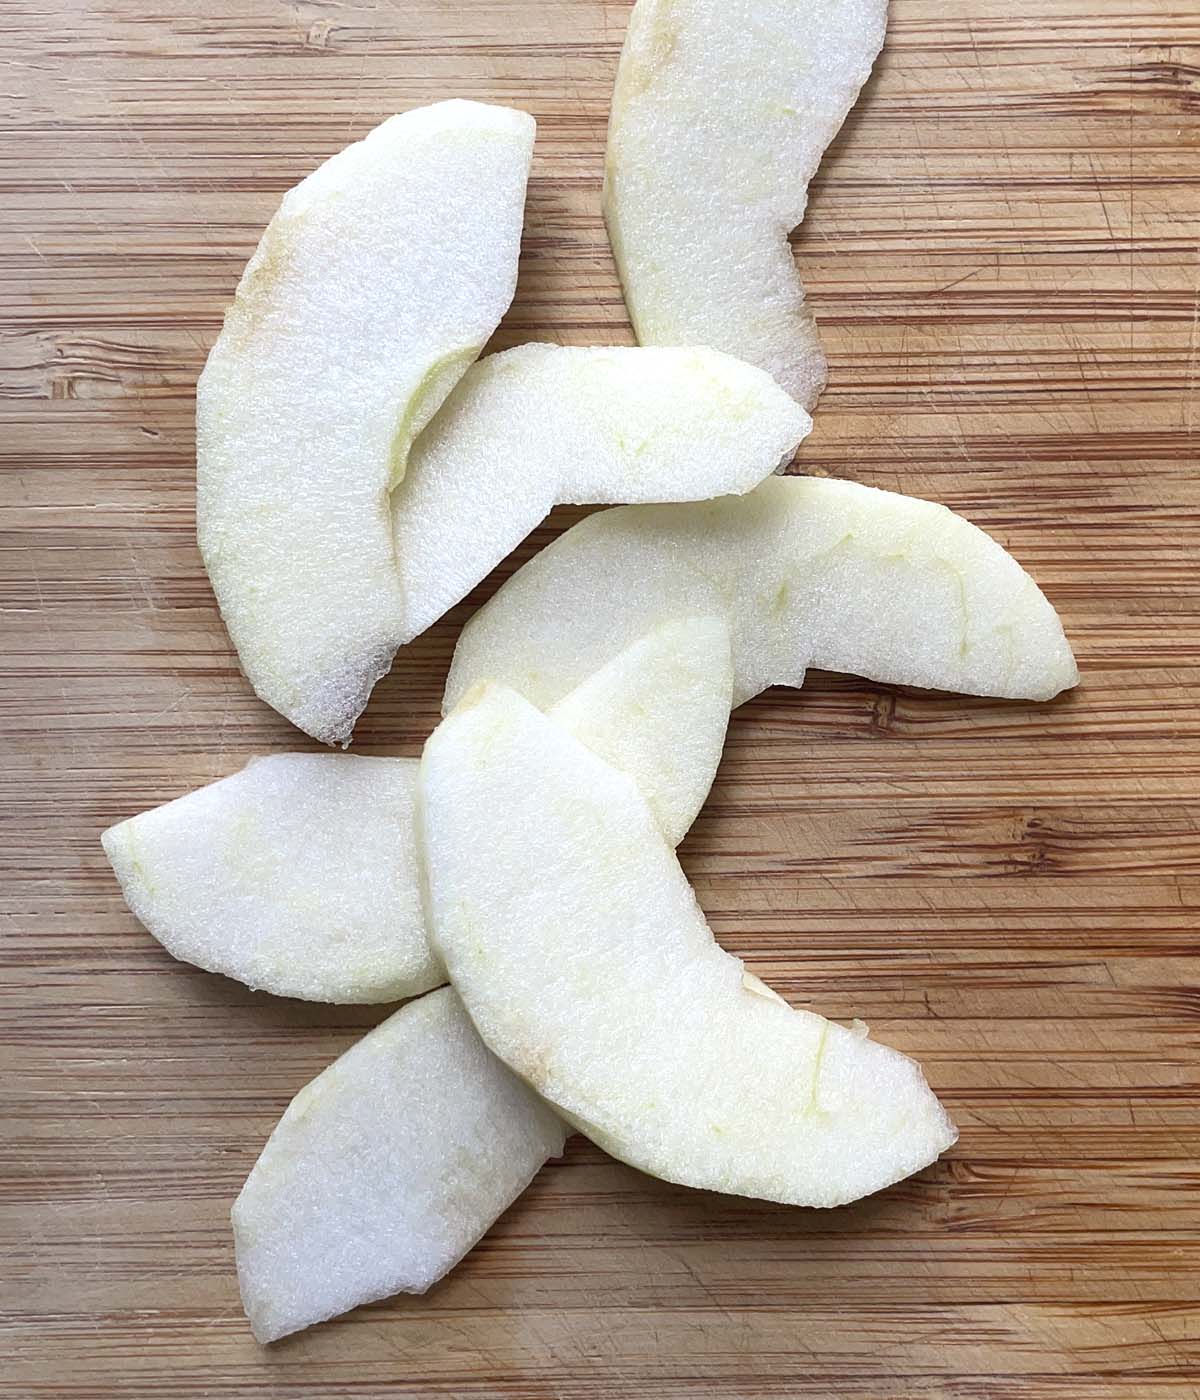 Slices of peeled apple on a wooden cutting board.